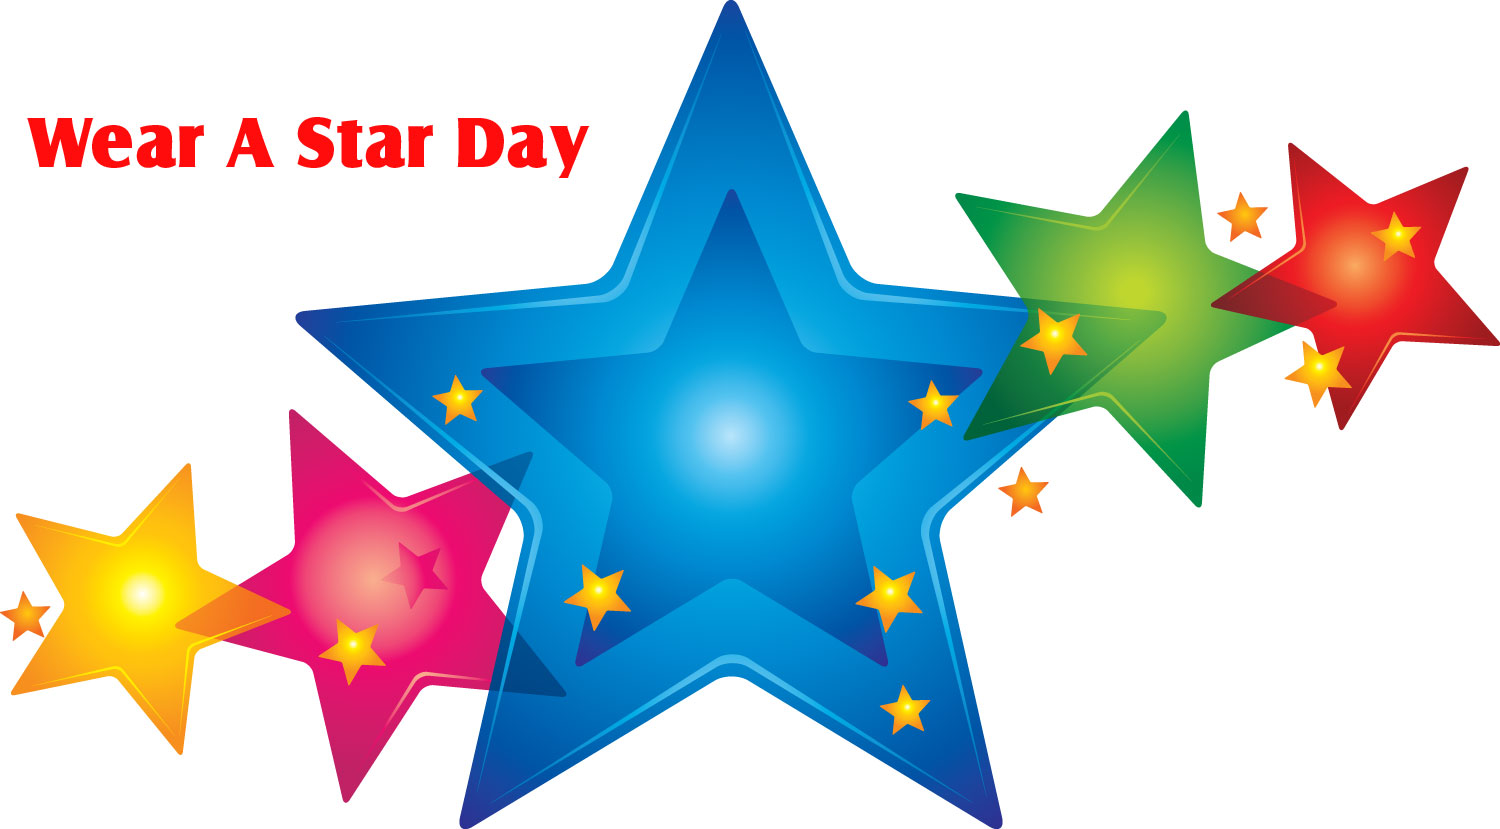 Wear A Star Day - A Day to wear a star. Wearing a star gives hope to families who have experienced the loss of a child. #WearAStarDay